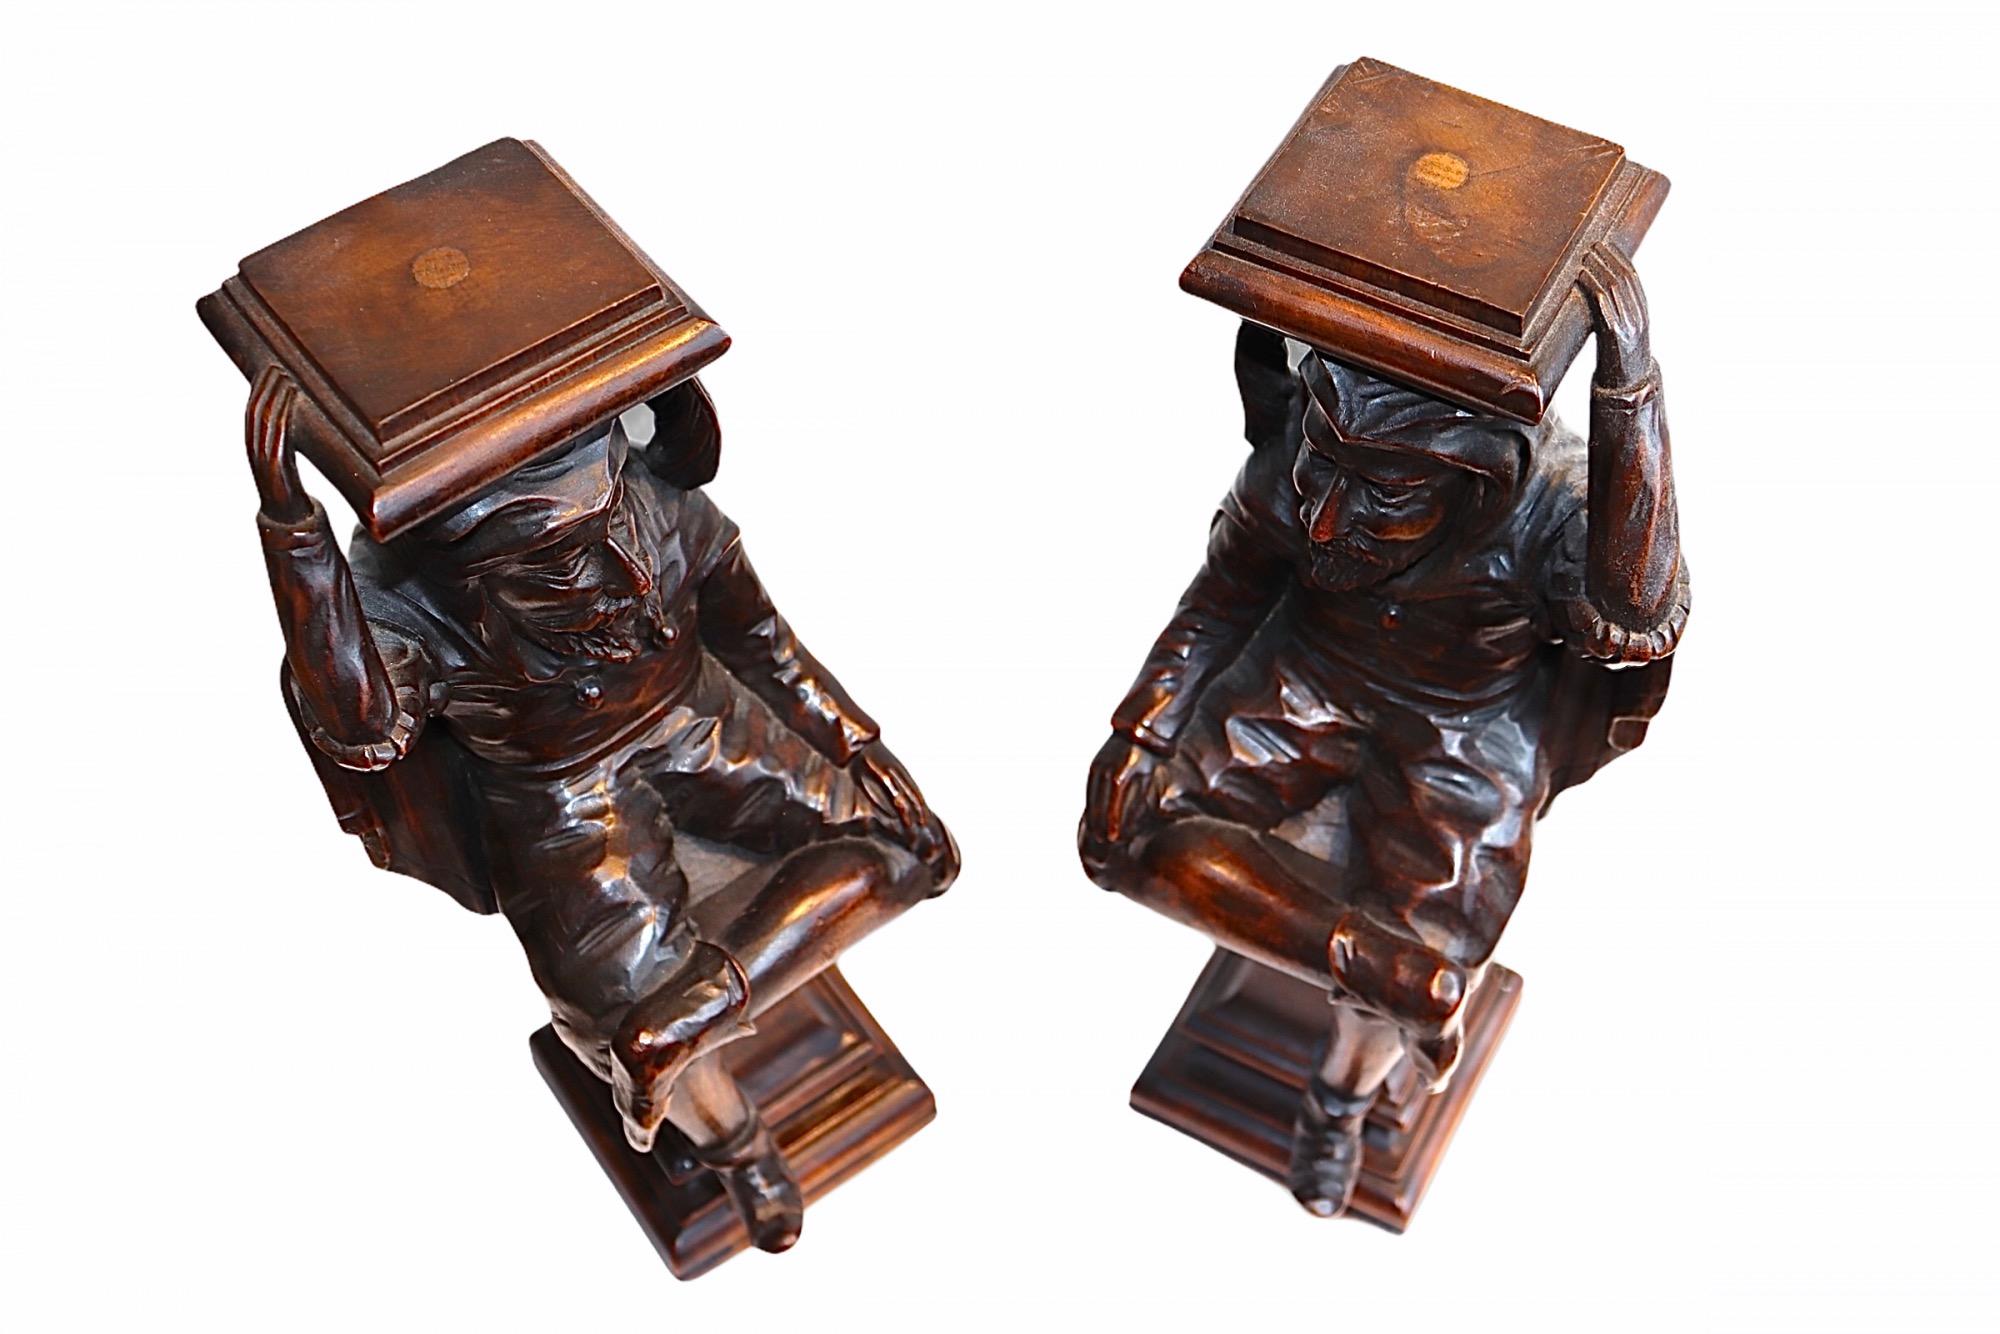 Pair of English Carved Walnut Wood Figures of Court Jesters, 18th Century For Sale 2